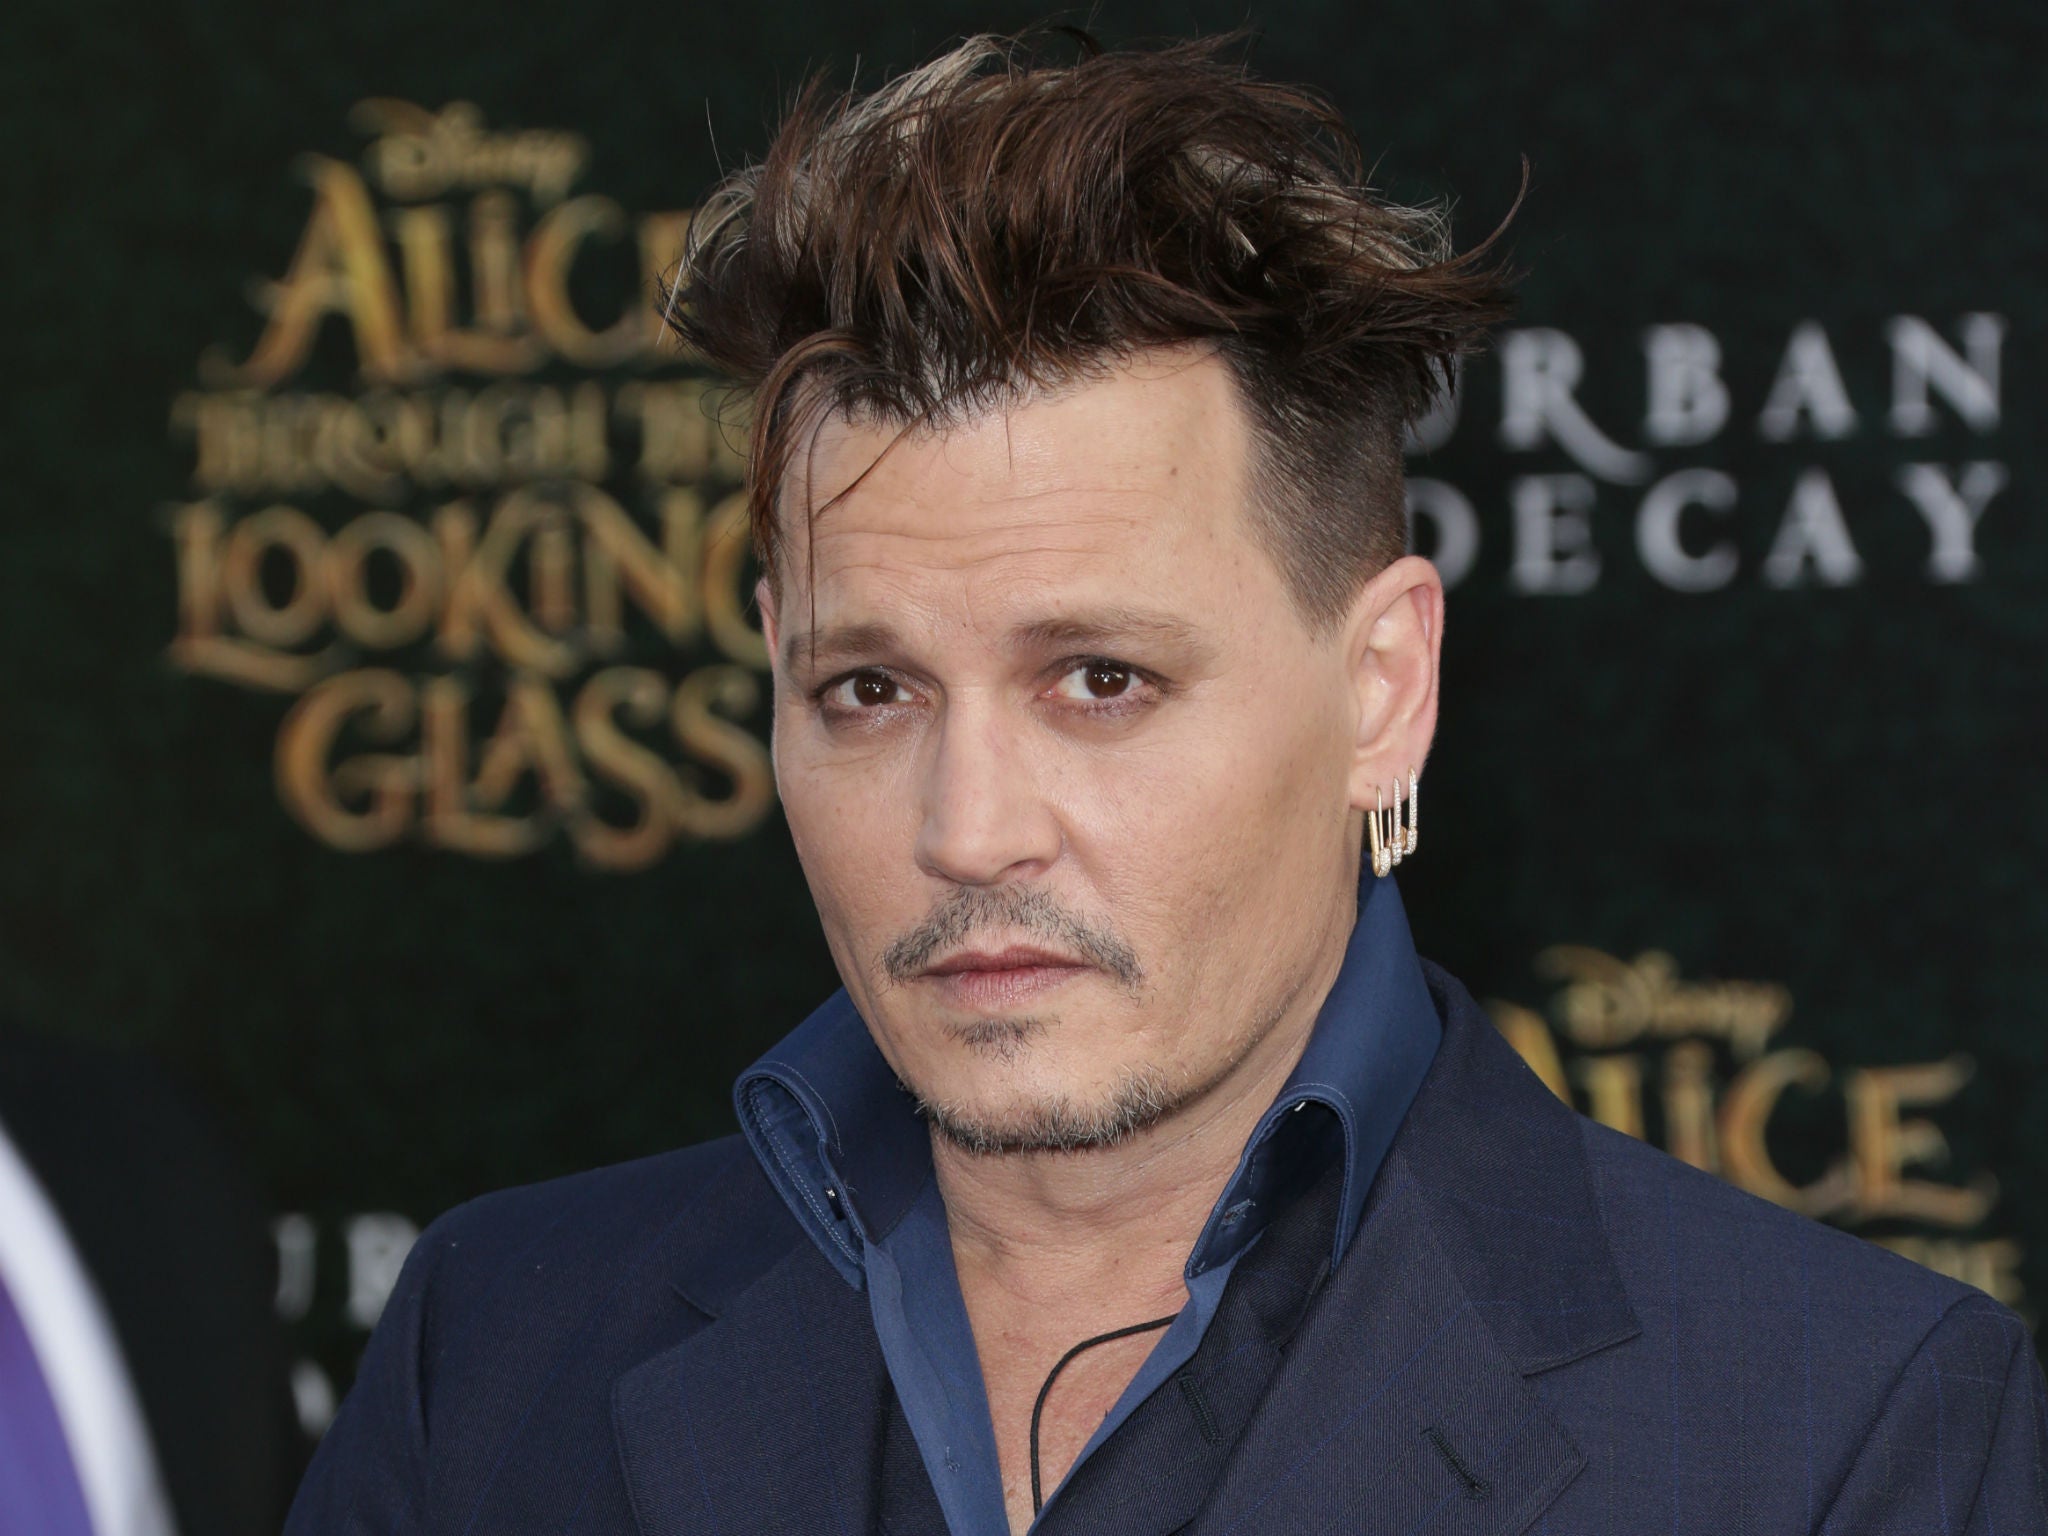 Depp says he has played music since as a young teenager and then embarked on a career in acting 'by accident'